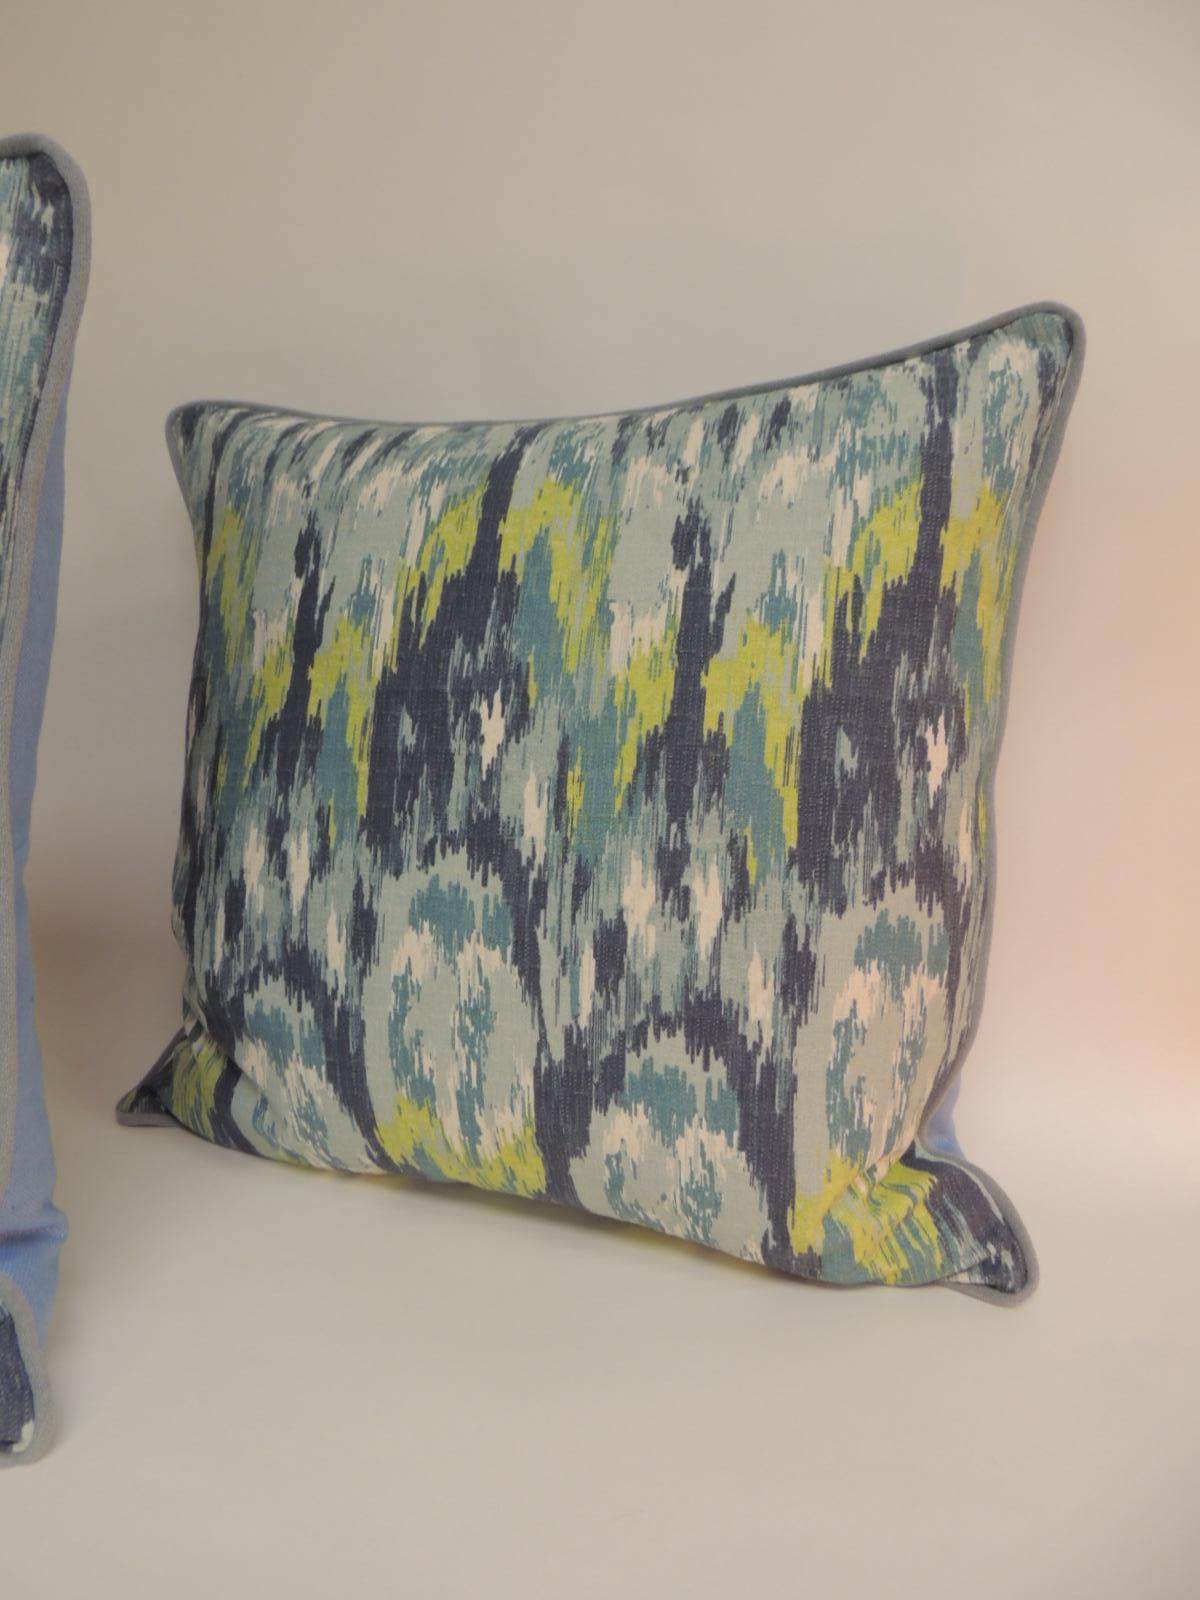 Pair of vintage colorful square bark cloth large decorative pillows with cotton welt all around and 
ATG blue linen backings. The backings are ATG custom design. In shades of blue, yellow, natural and white.
Ideal as floor pillows.
Size: 24 x 24 x 6.